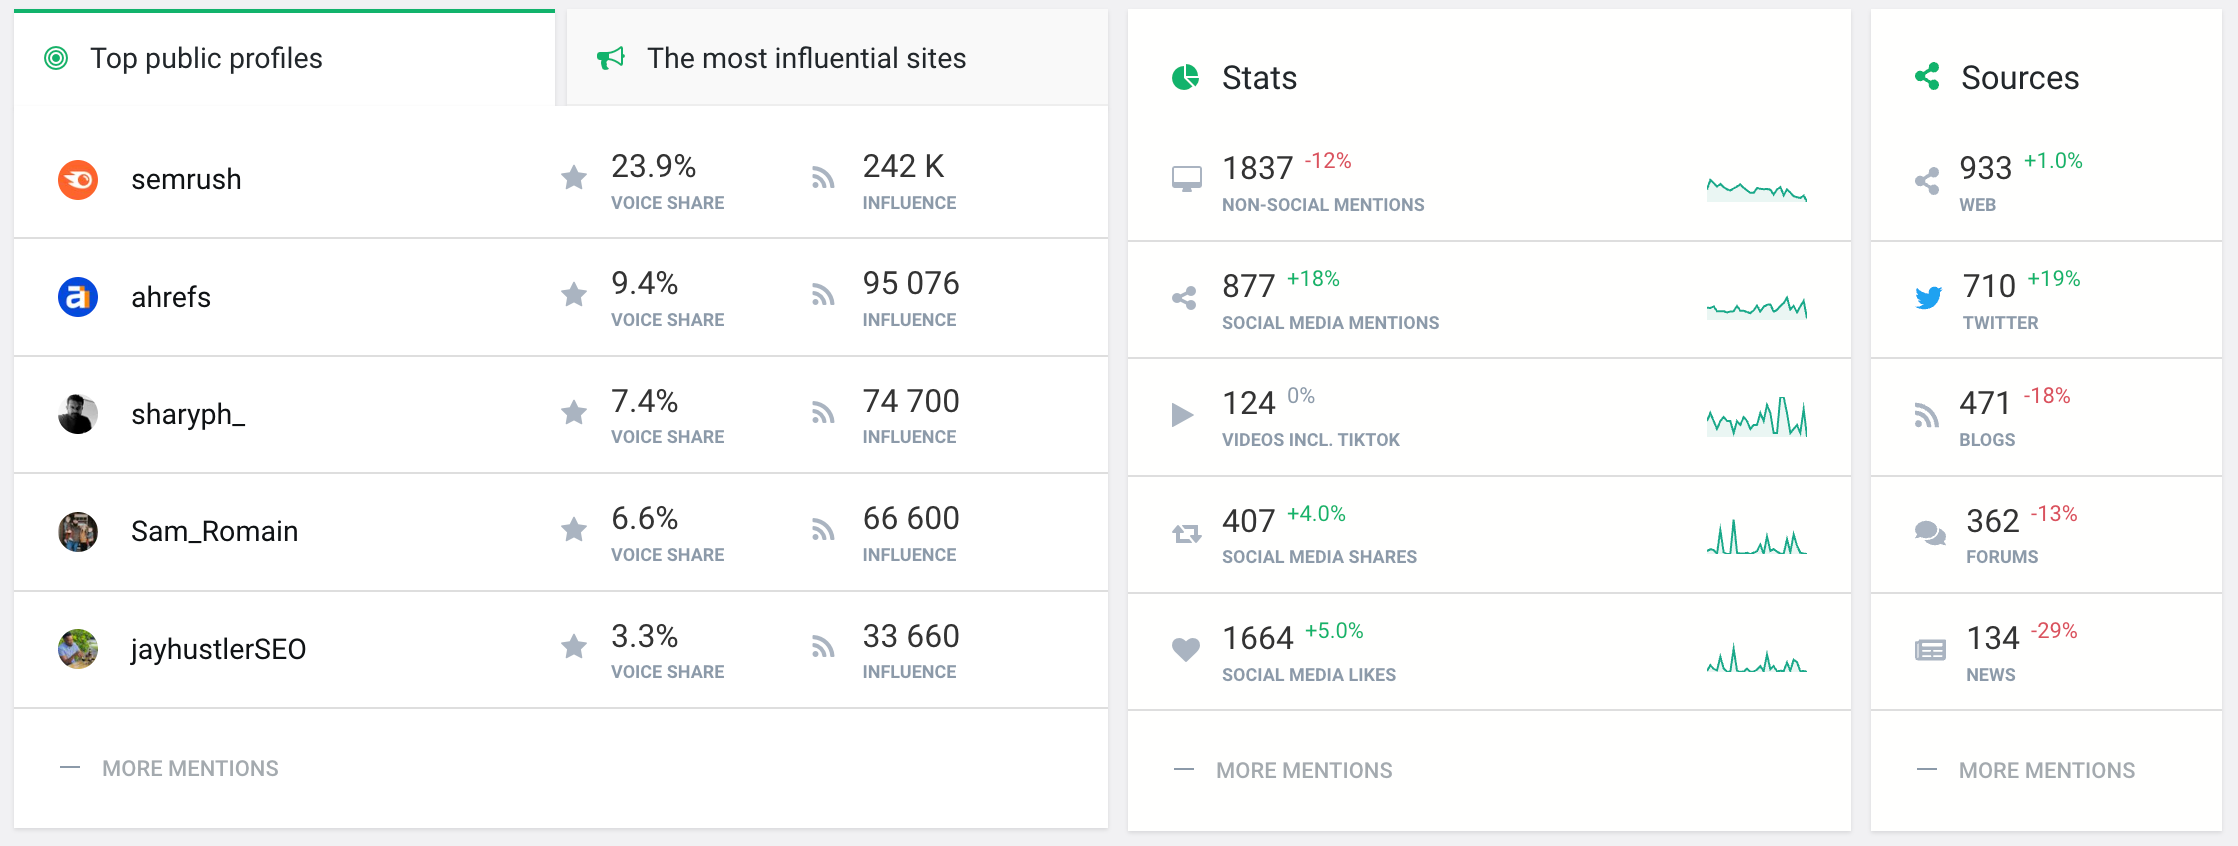 Screenshot from Brand24 Summary tab showing top public profiles, non-social and social mentions and other stats